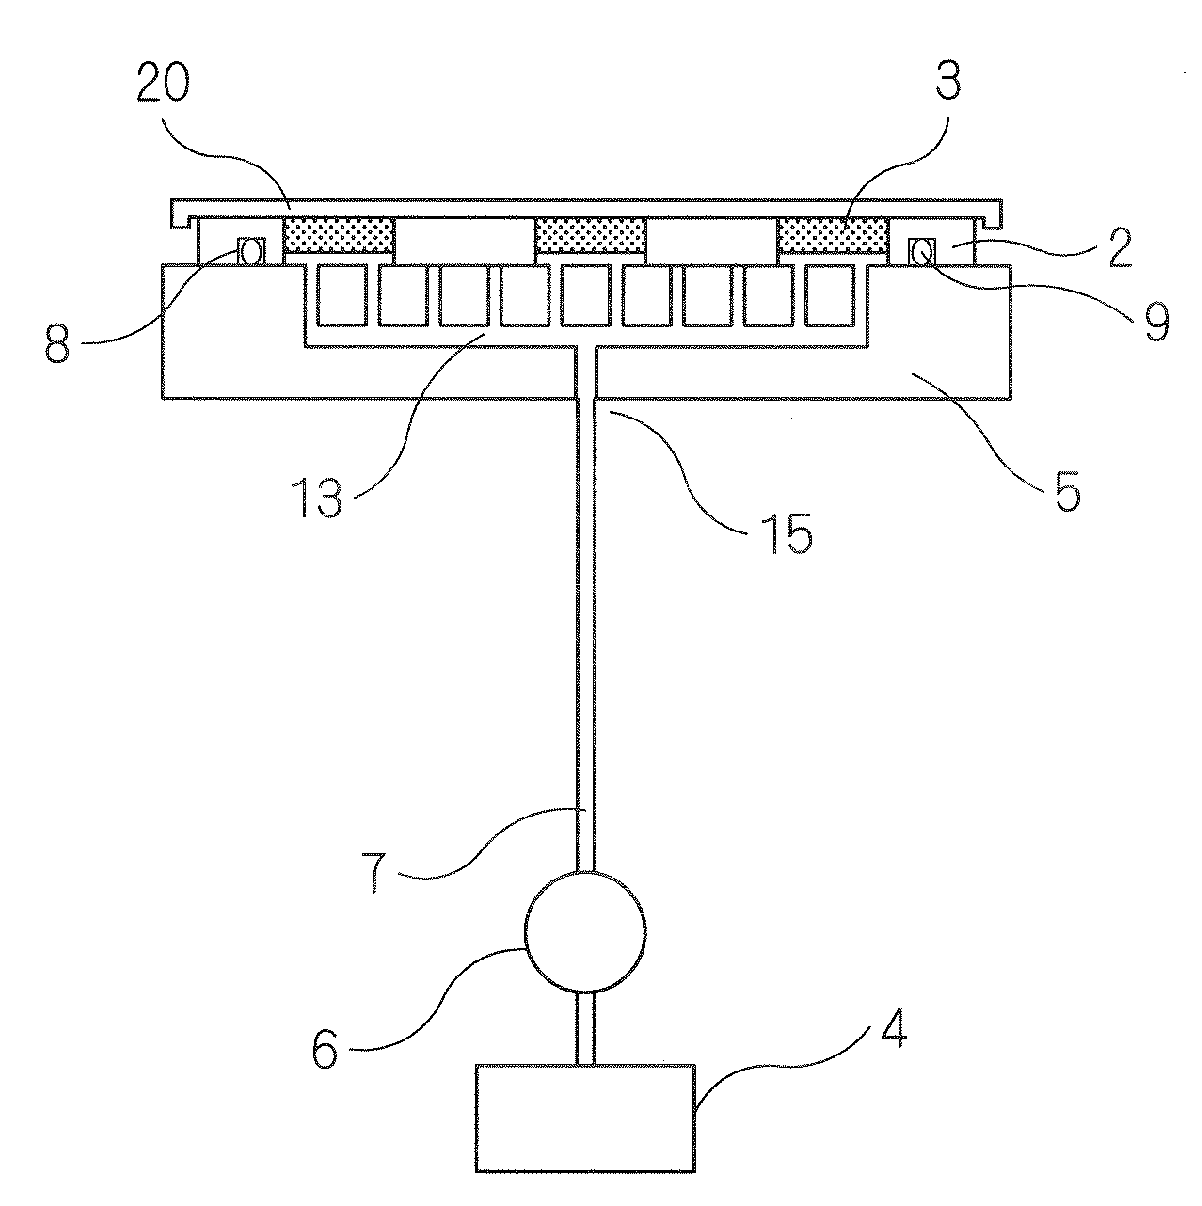 Semiconductor testing jig and semiconductor testing method performed by using the same